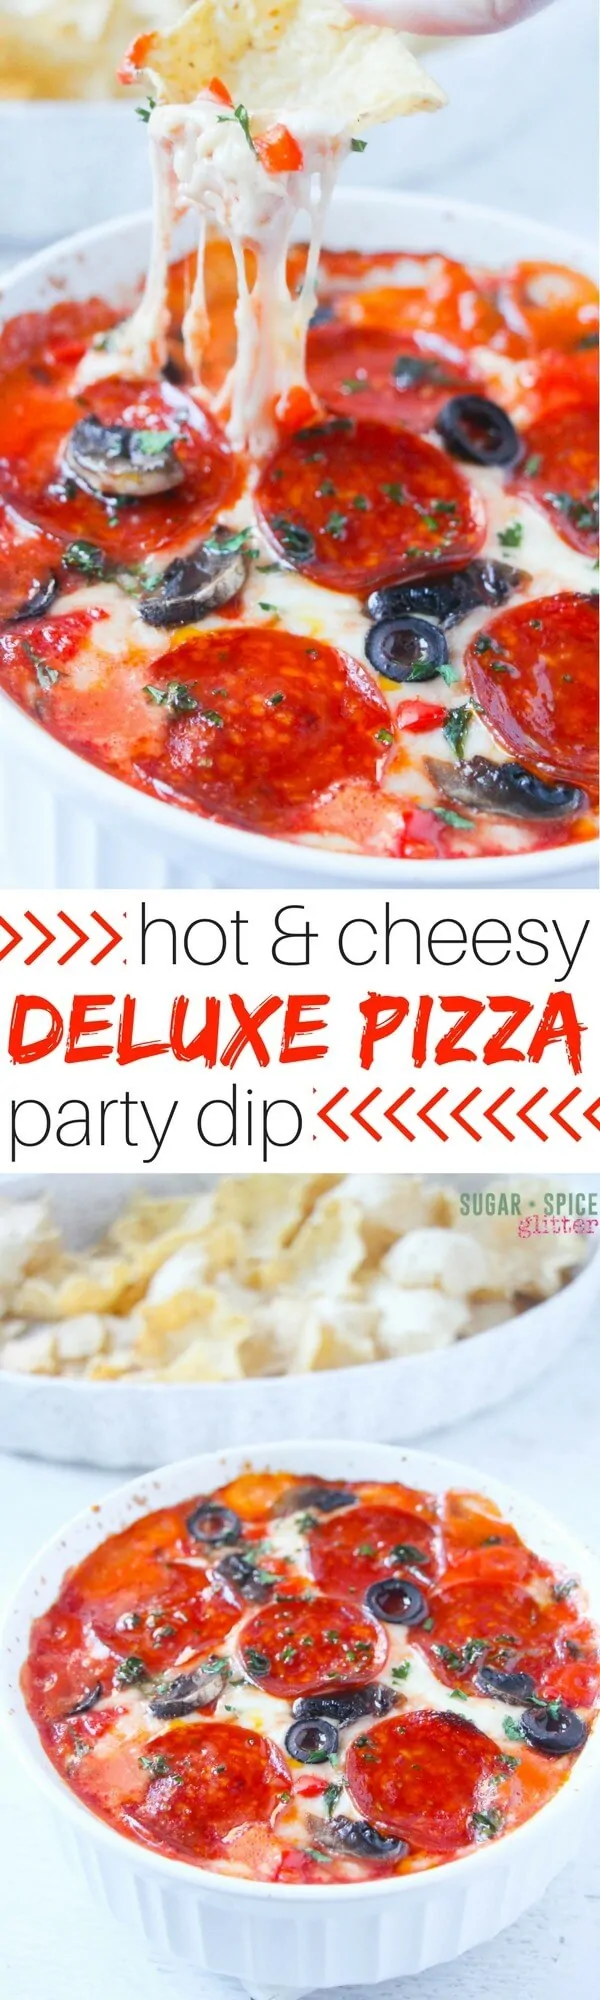 This hot and cheesy deluxe pizza dip is perfect for your next get-together or a chill movie night with the fam. Two layers of cheese, tomato sauce, and all of your favorite toppings - it doesn't get better than this party dip